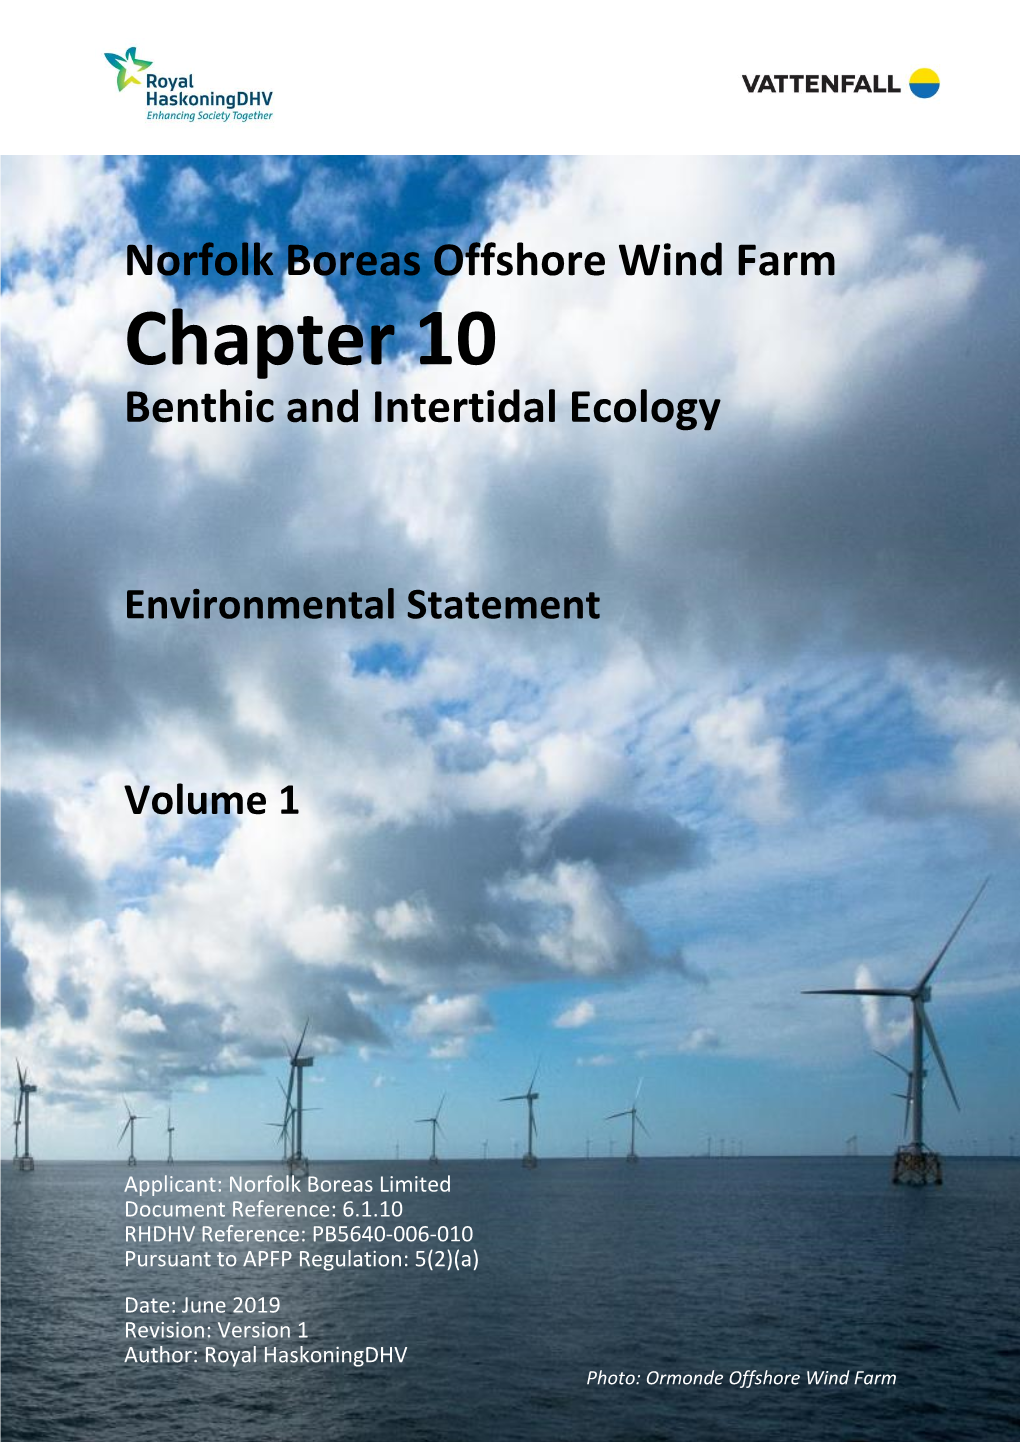 Norfolk Boreas Offshore Wind Farm Chapter 10 Benthic and Intertidal Ecology